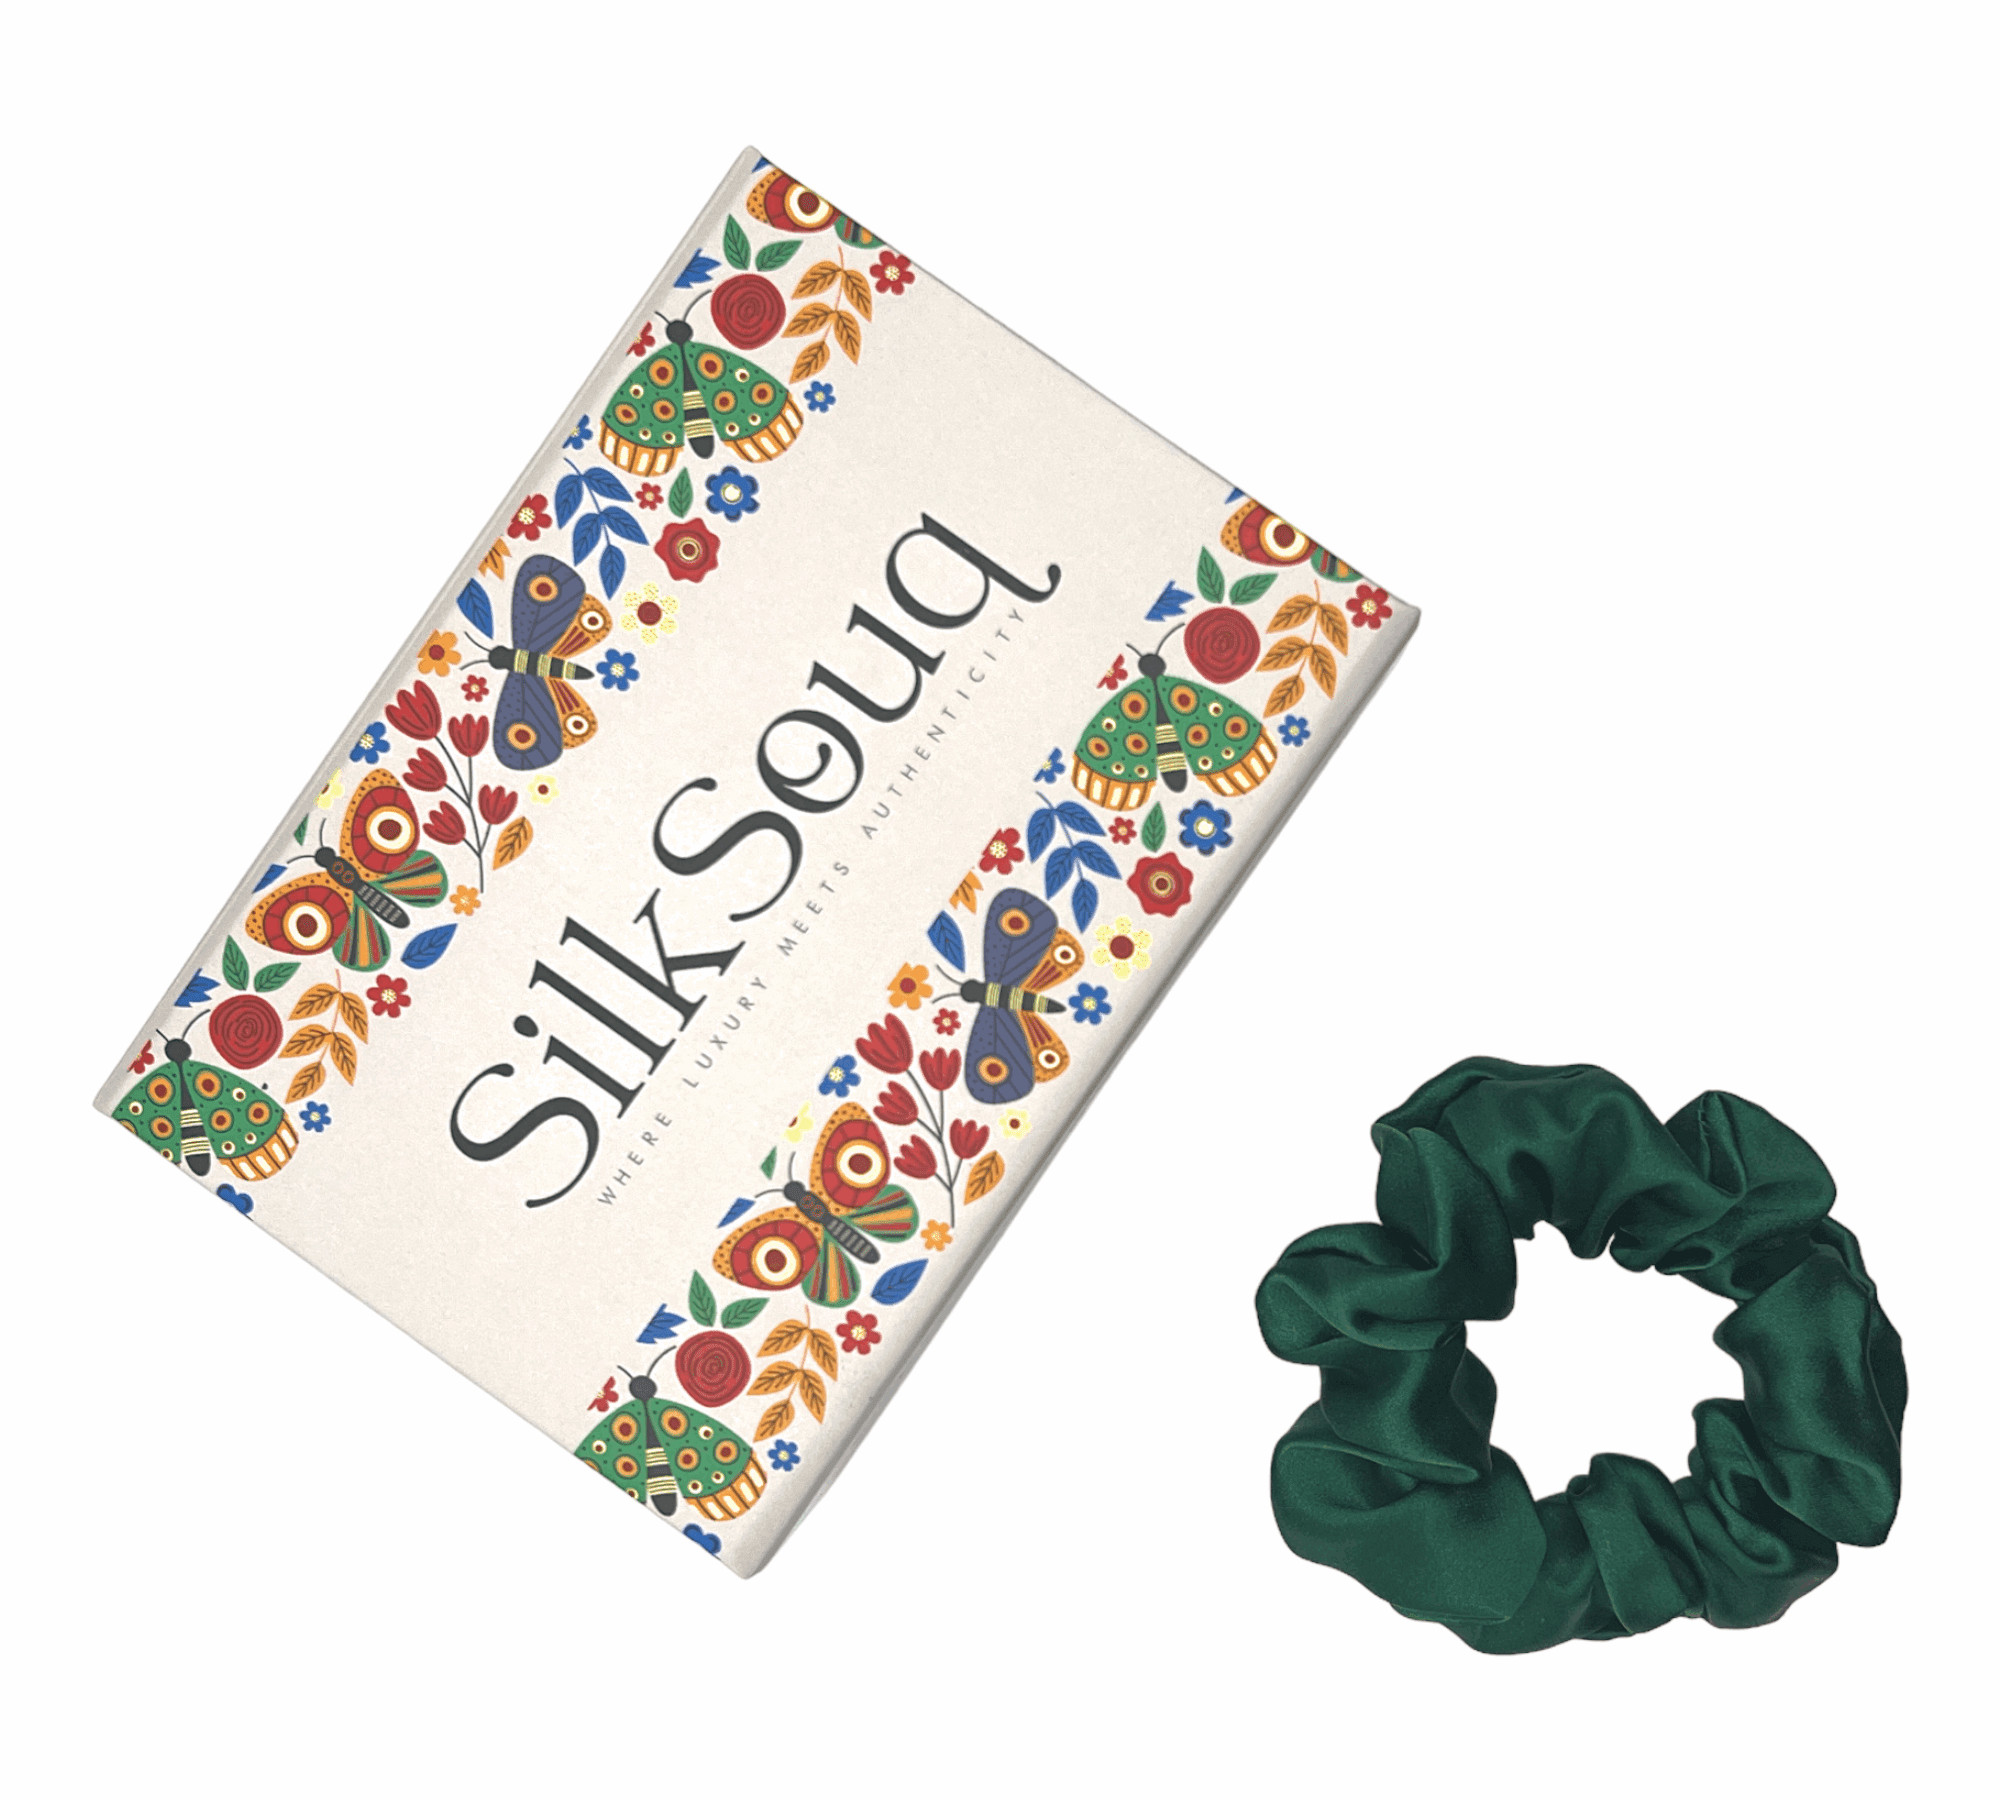 Pure Mulberry Silk Scrunchies From Silksouq & Silksouk, Also Known As Silk Souq In Uae